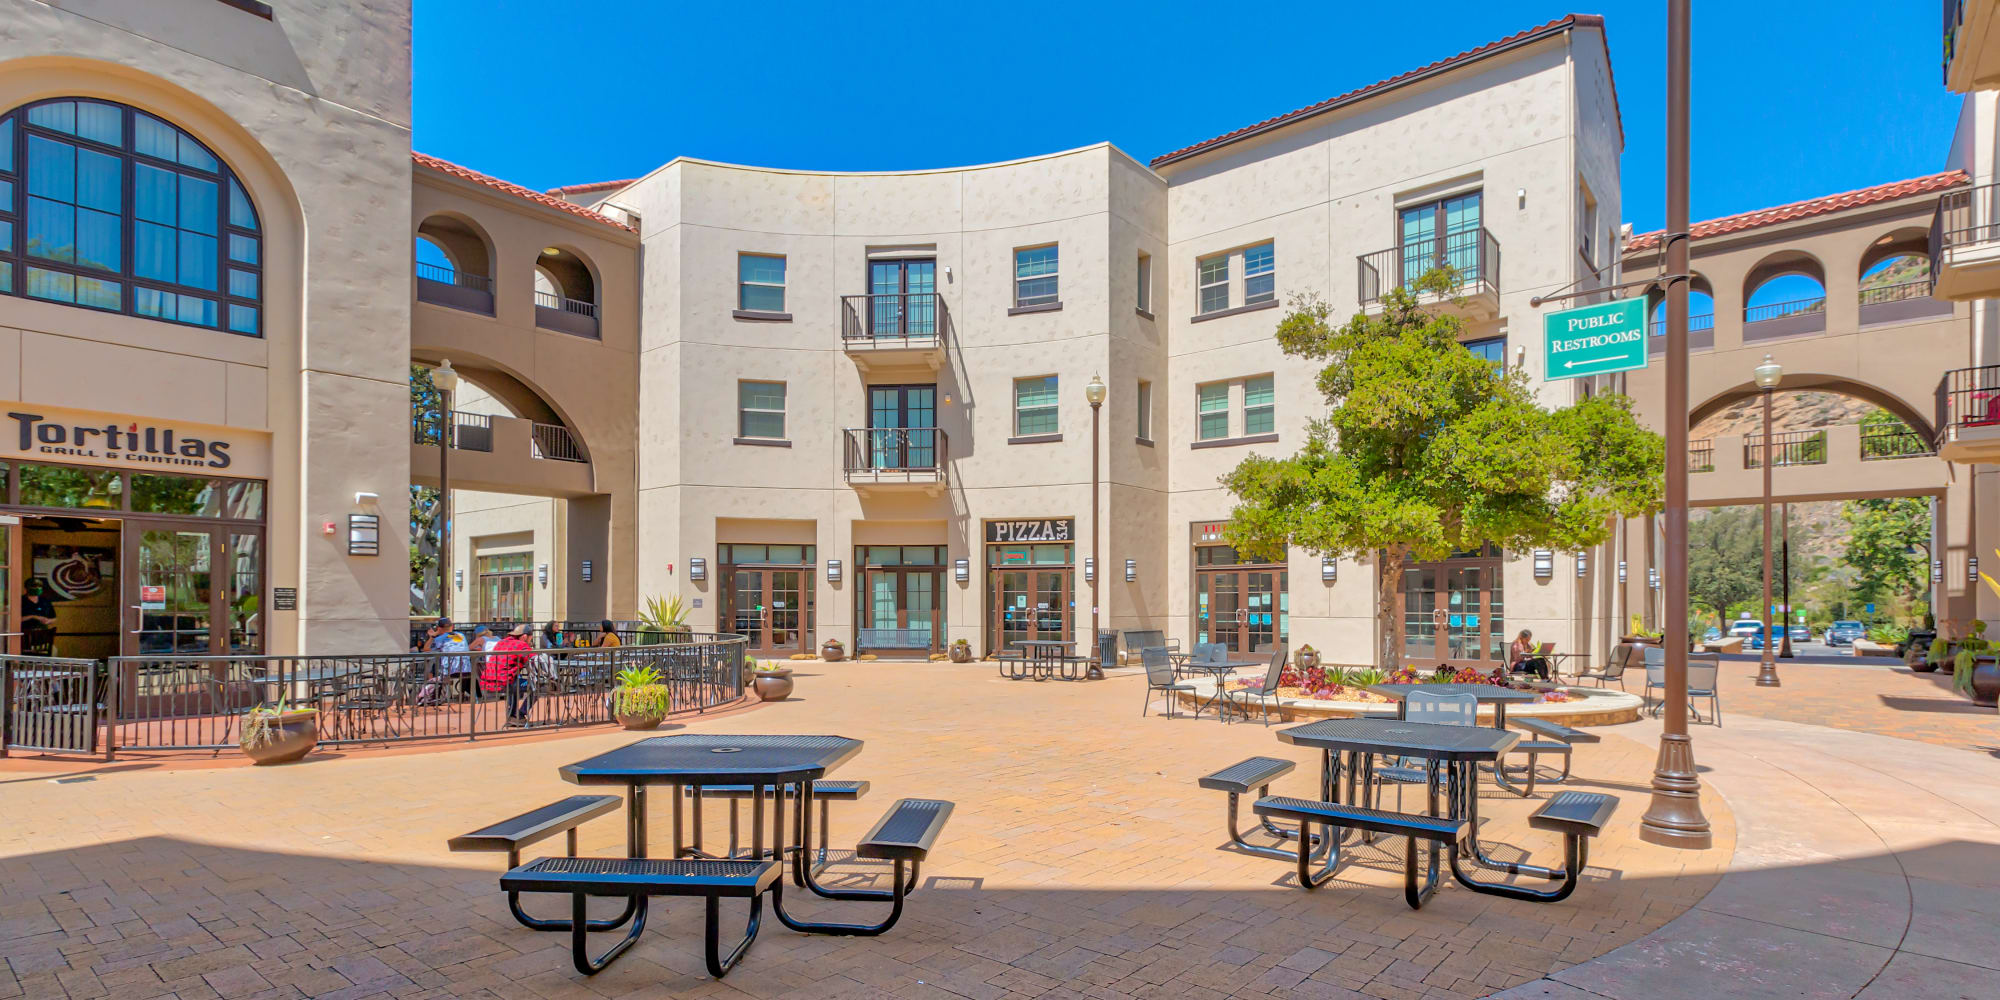 Gorgeous day in the retail courtyard at Mission Hills in Camarillo, California